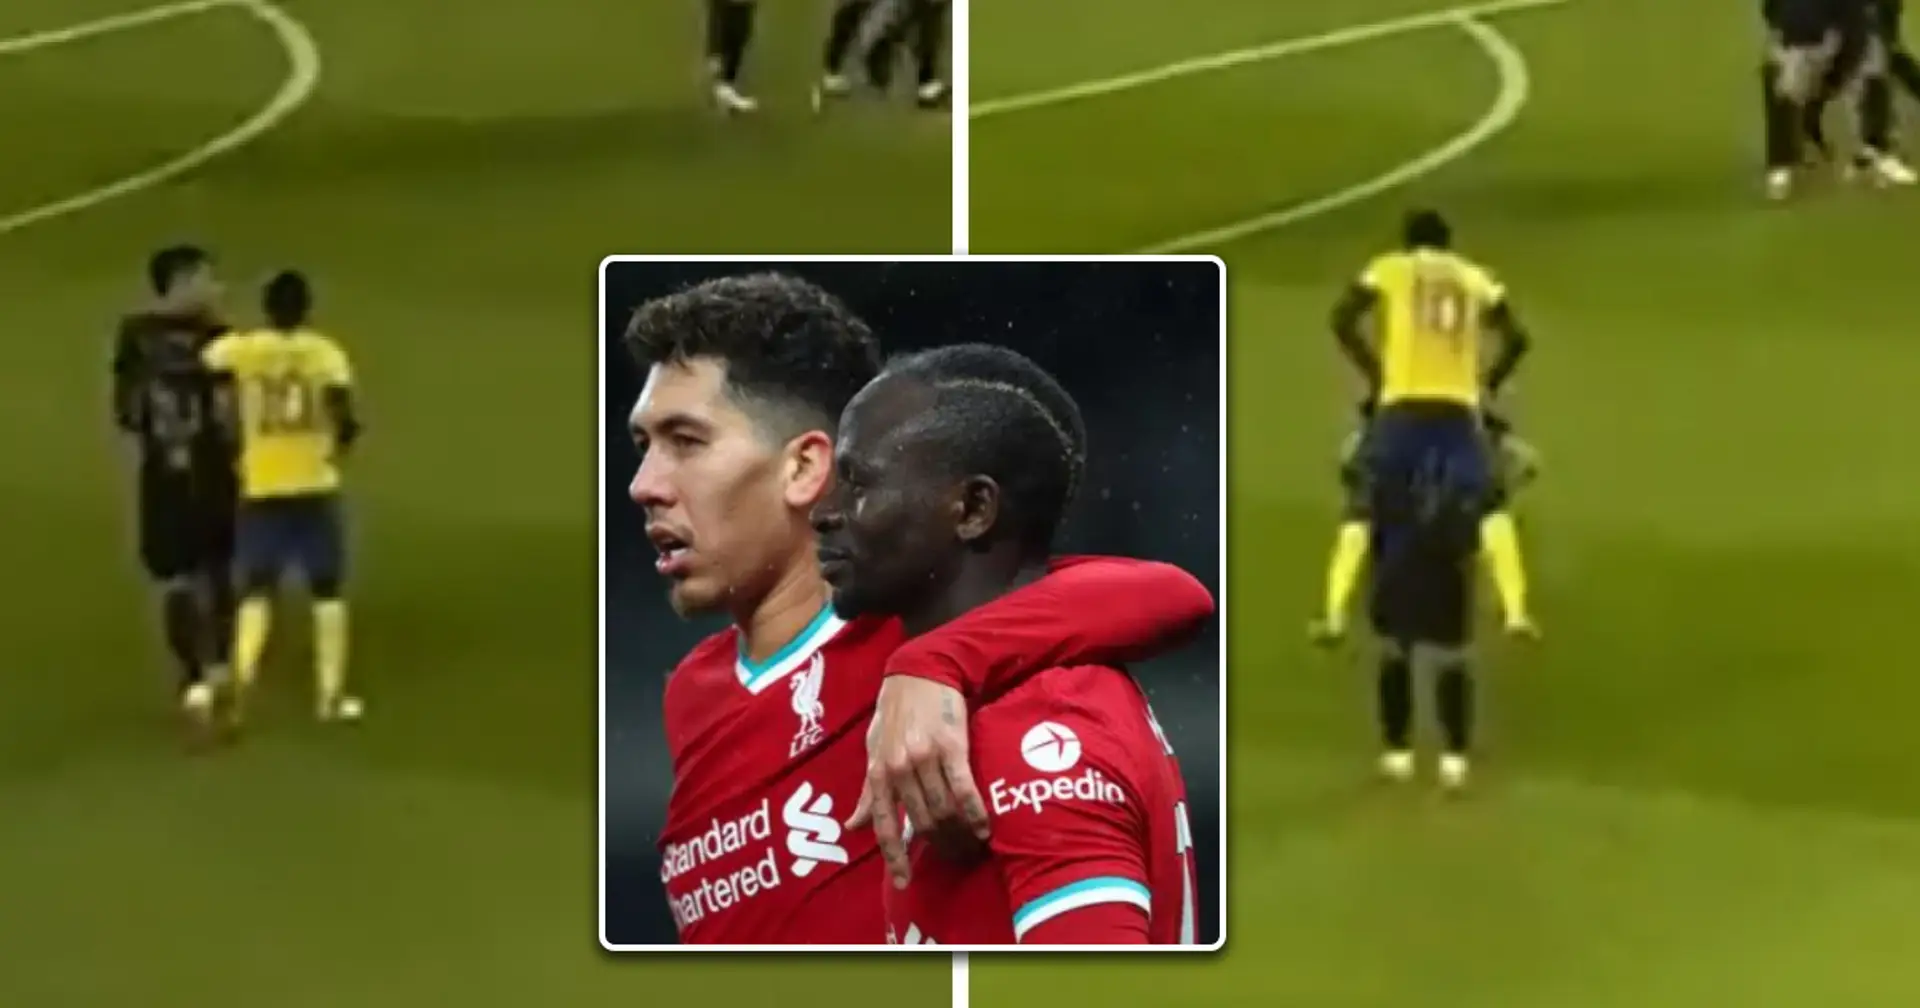 Mane jumps on Firmino after scoring against his team — Bobby's reaction spotted